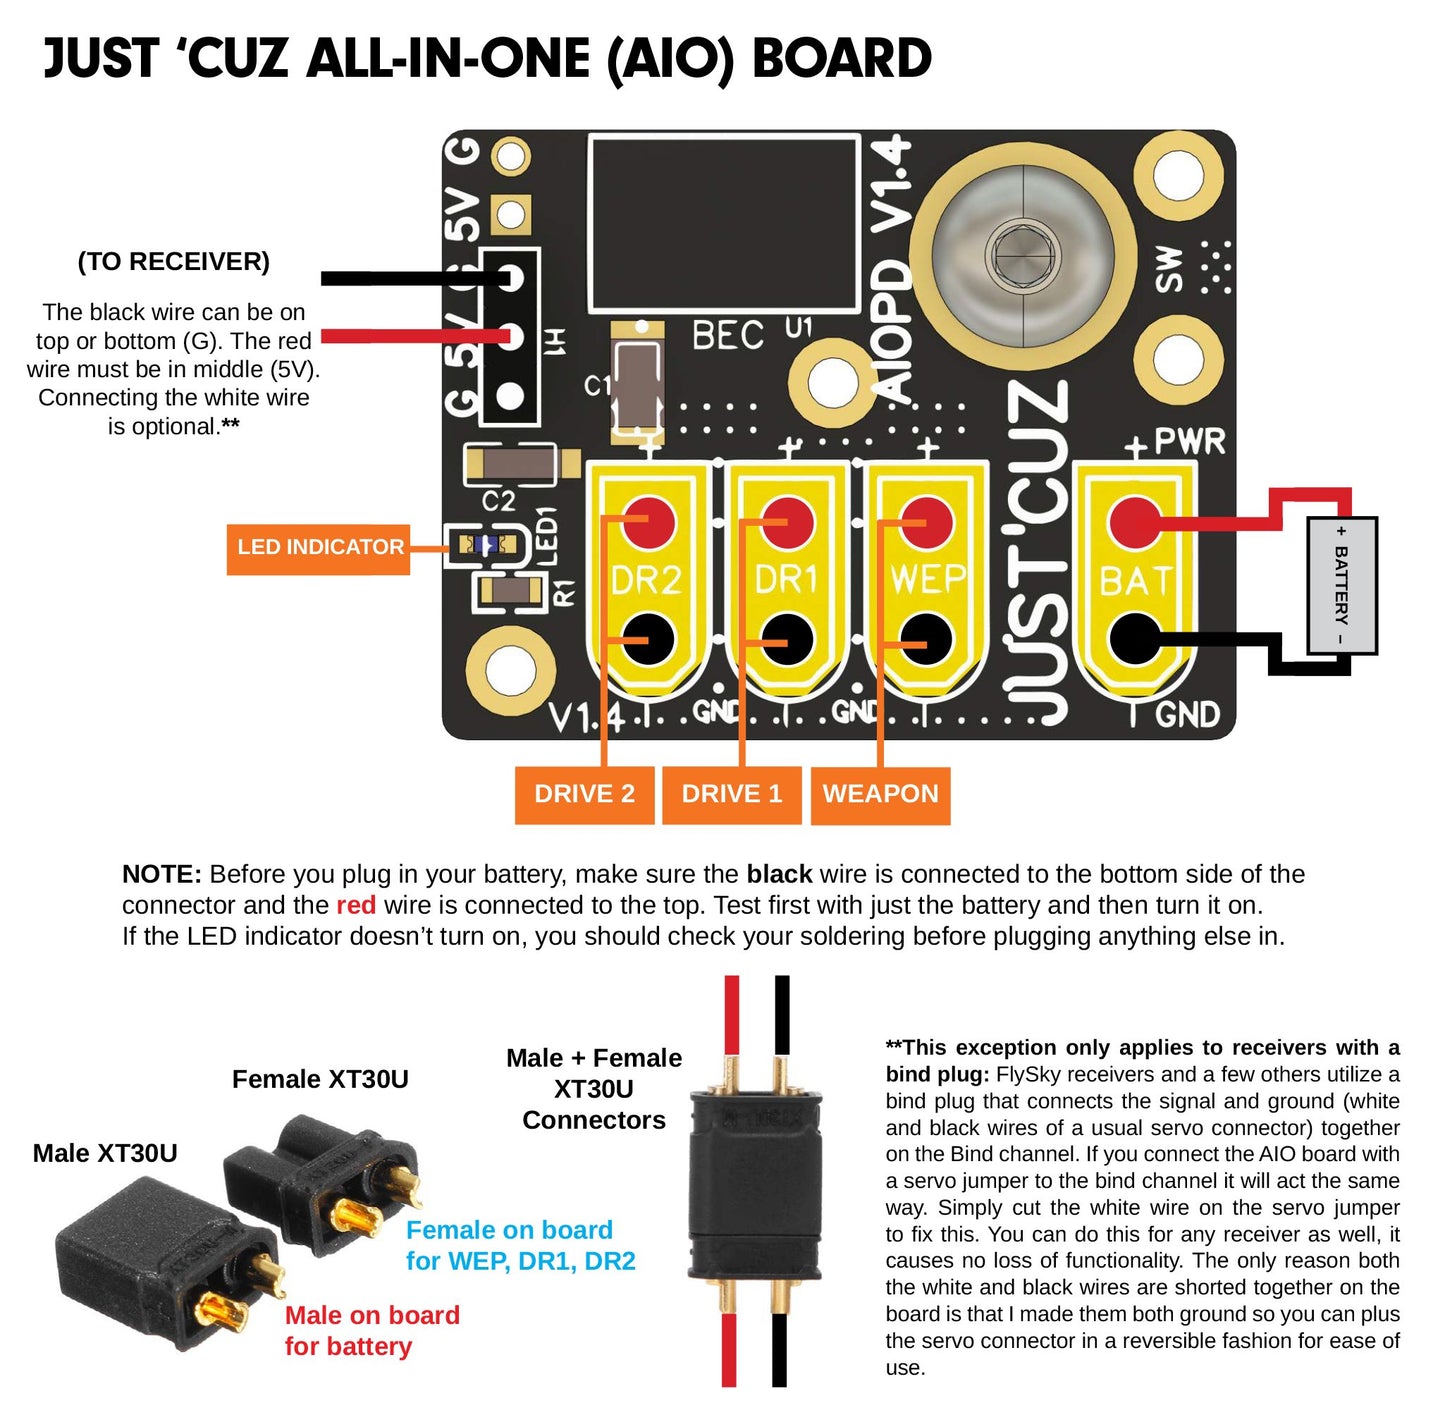 Just 'Cuz All-In-One PD Board V1.6